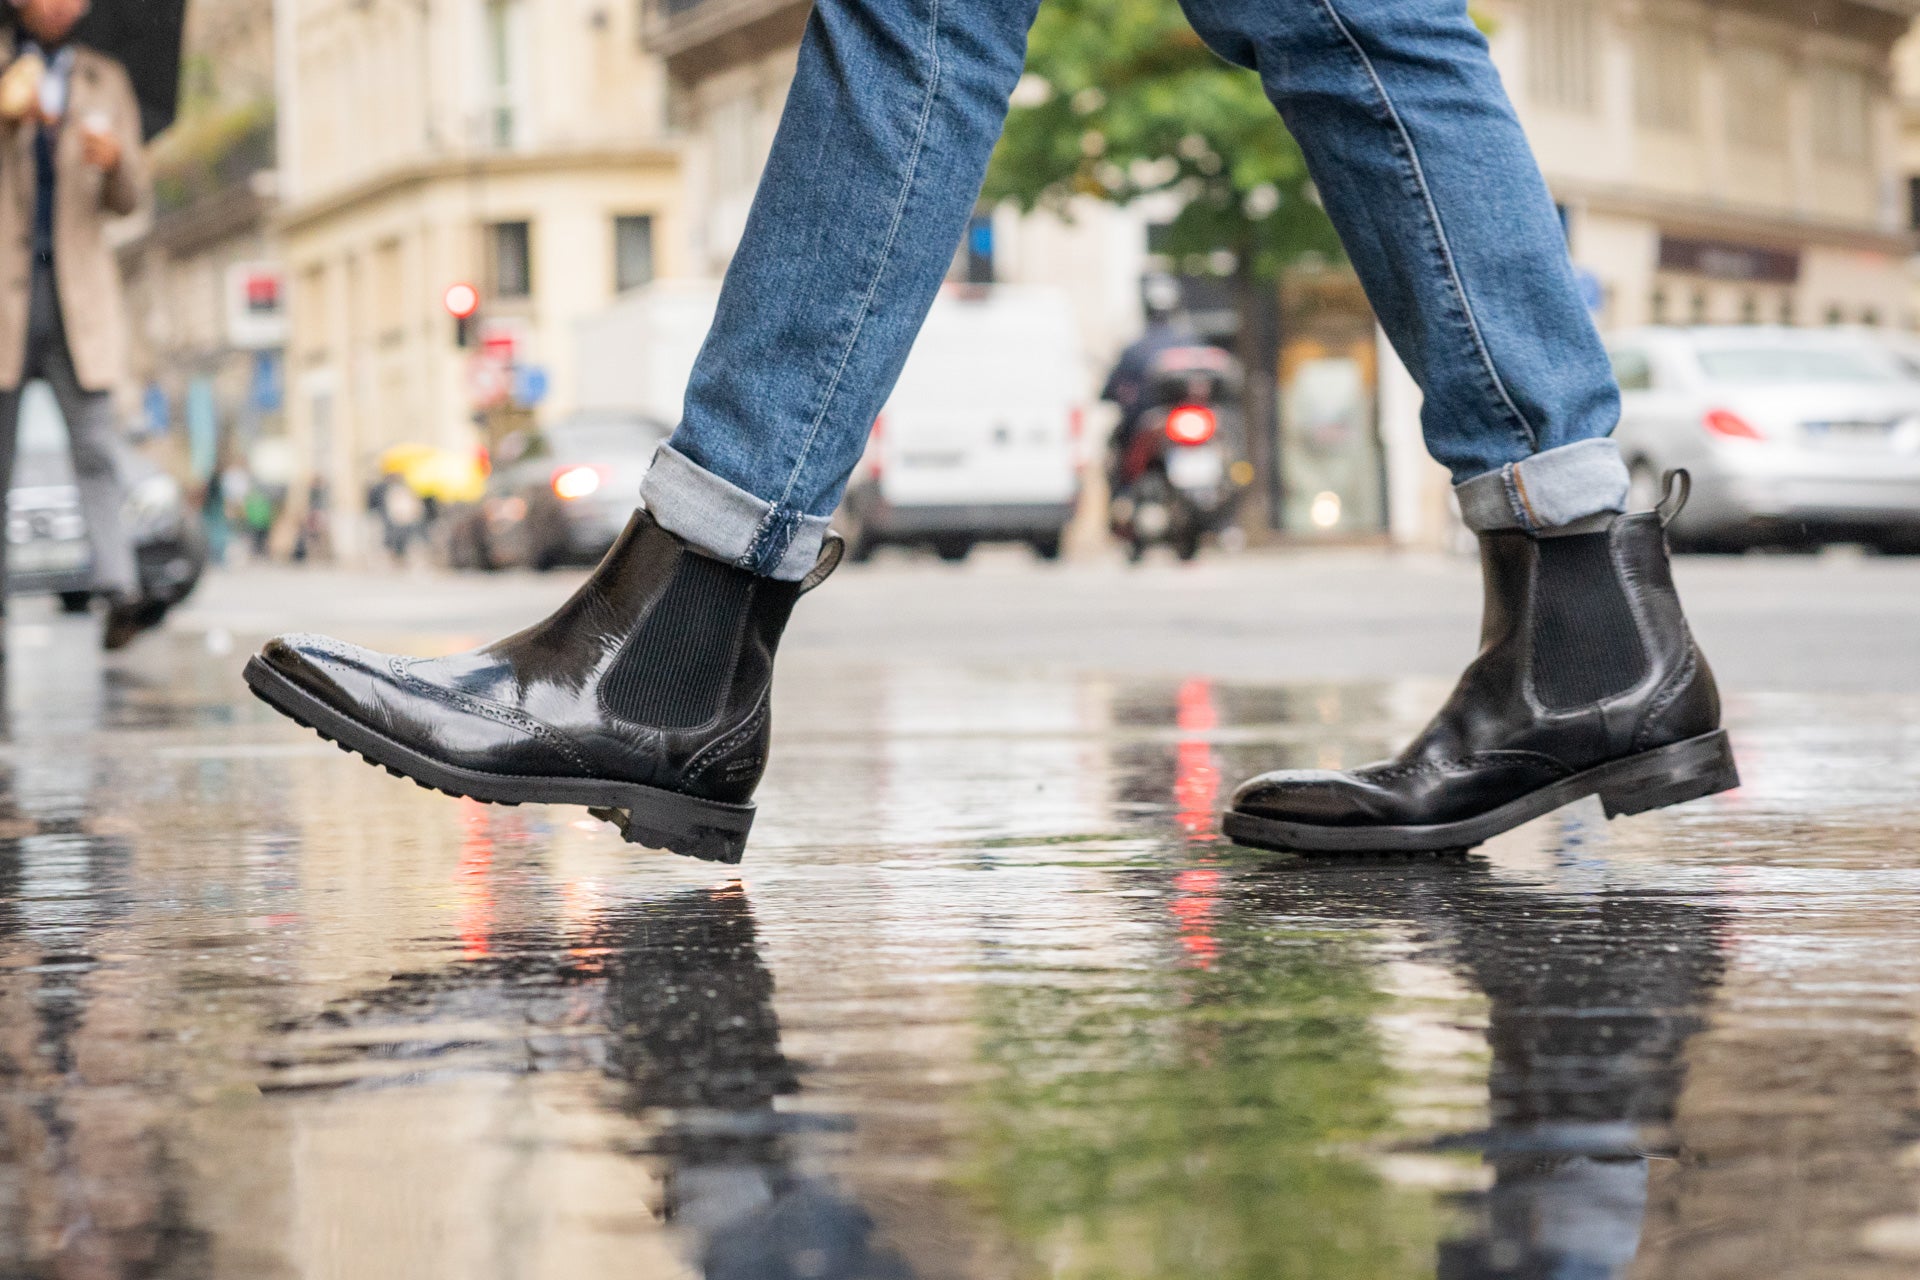 Luske Caius 945 What leather shoes to wear while it's raining? – Melvin & Hamilton